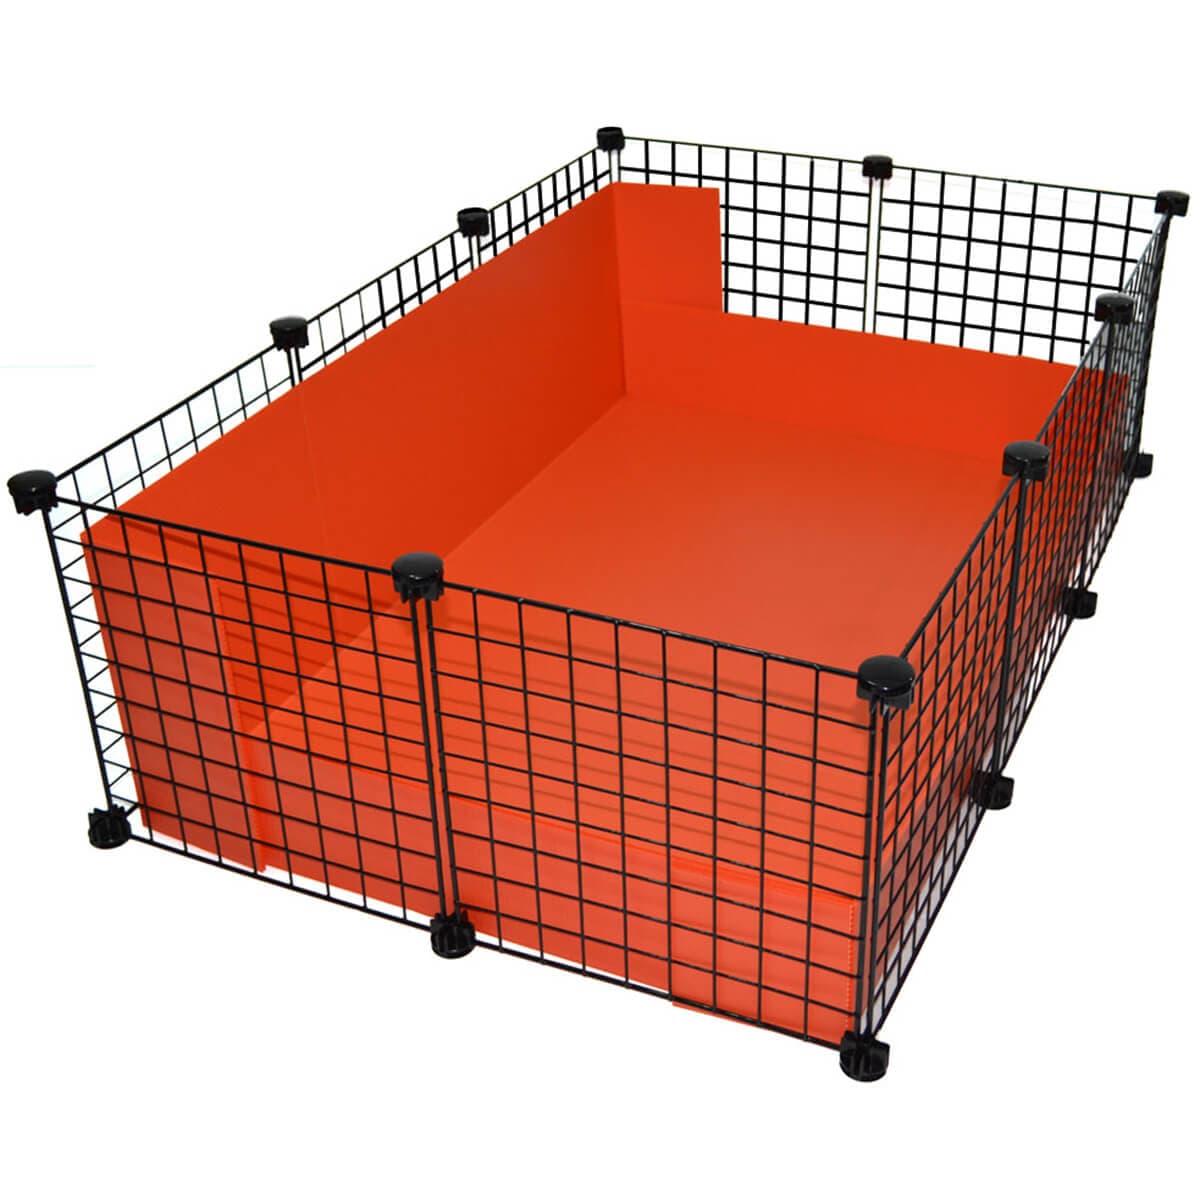 Small orange C&C guinea pig cage with black grids and connectors